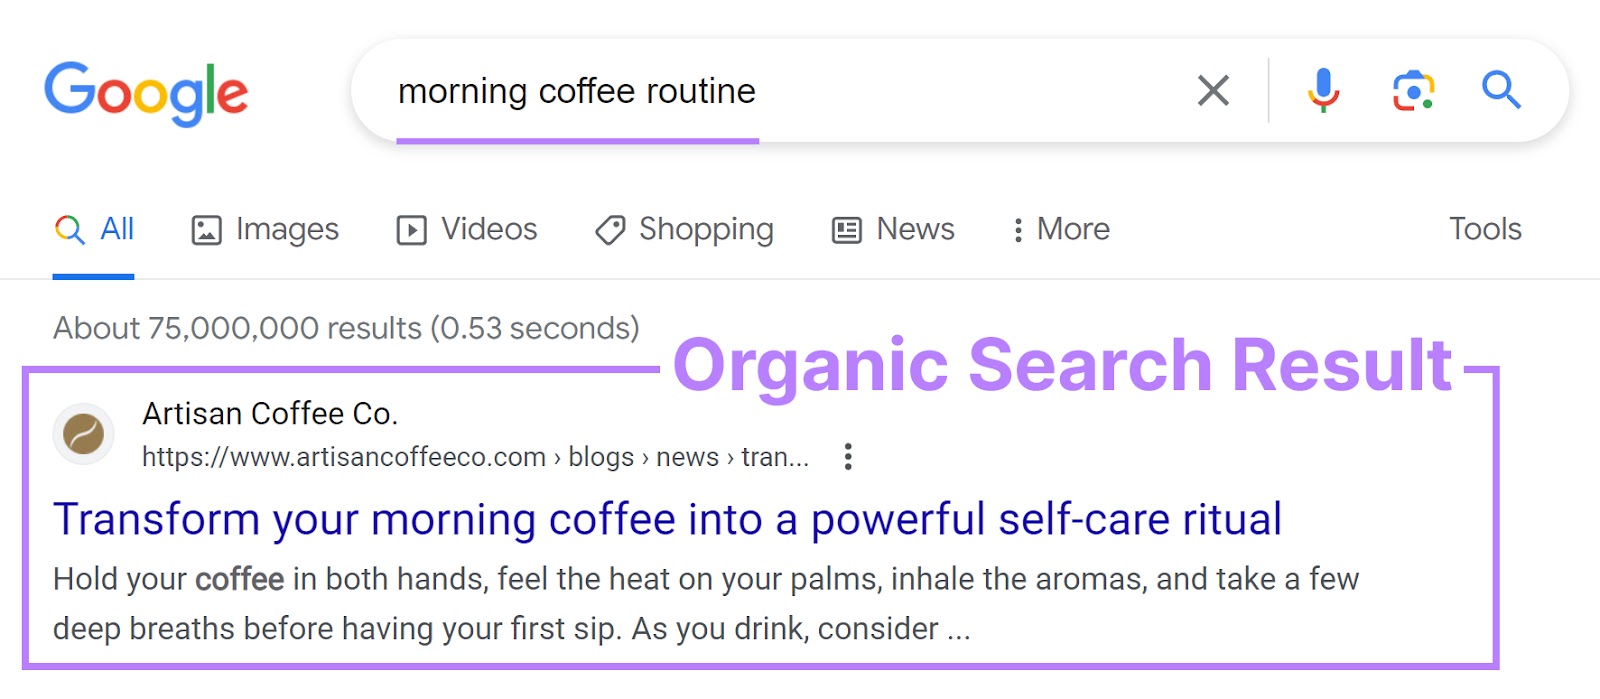 Organic search result on Google SERP for "morning coffee routine"